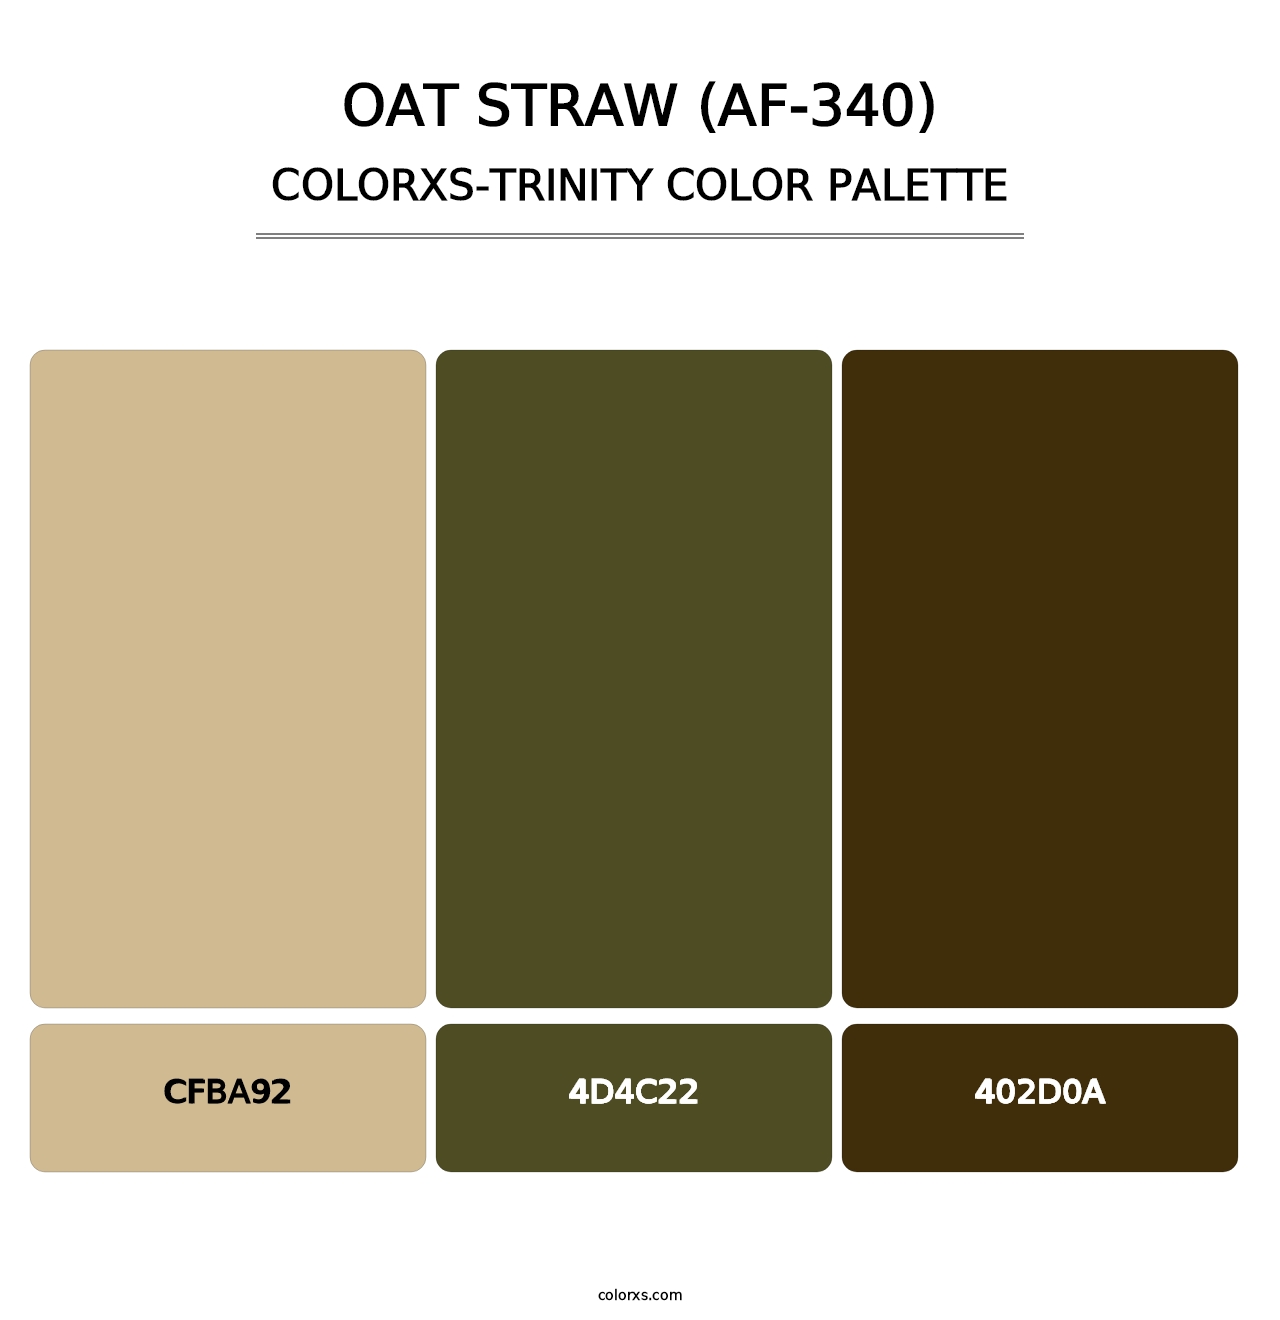 Oat Straw (AF-340) - Colorxs Trinity Palette